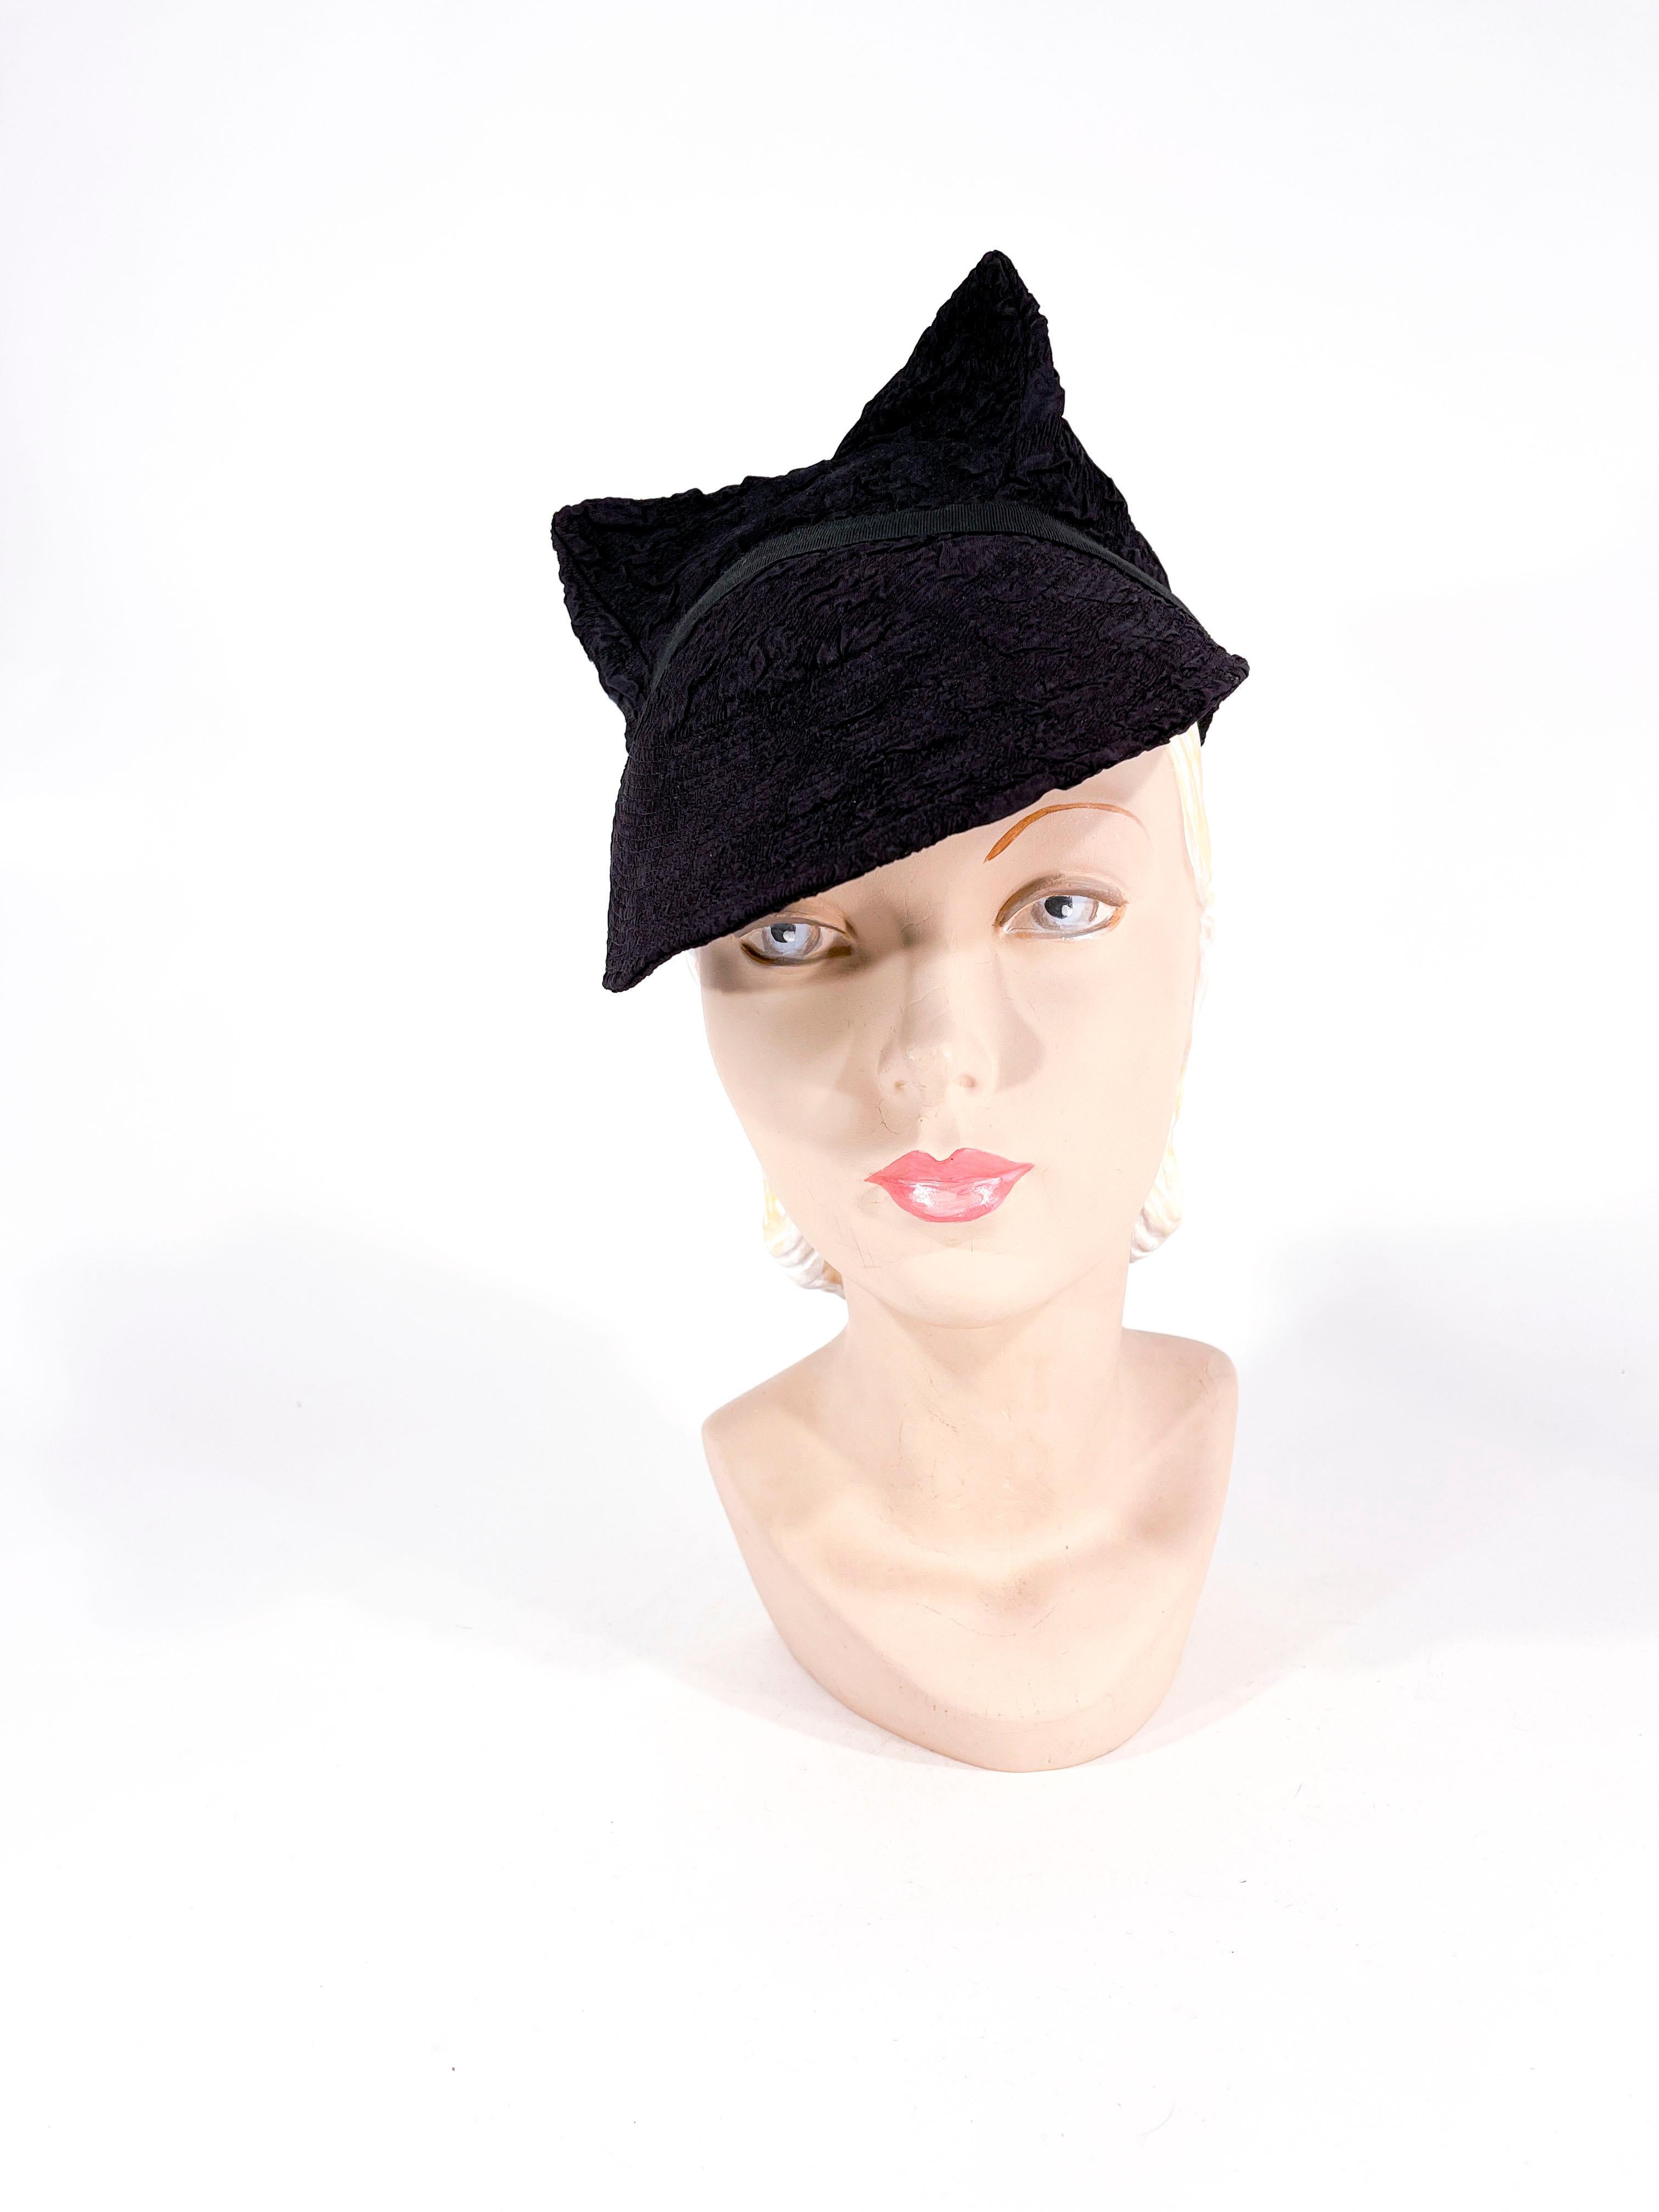 Early 1930s elegant Art Deco ladies dress hat created with a black textured rayon. The silhouette of the hat consists of an enlarged front brim, a grosgrain hat band along the center, and two sculpted double points. The interior of the hat is lined